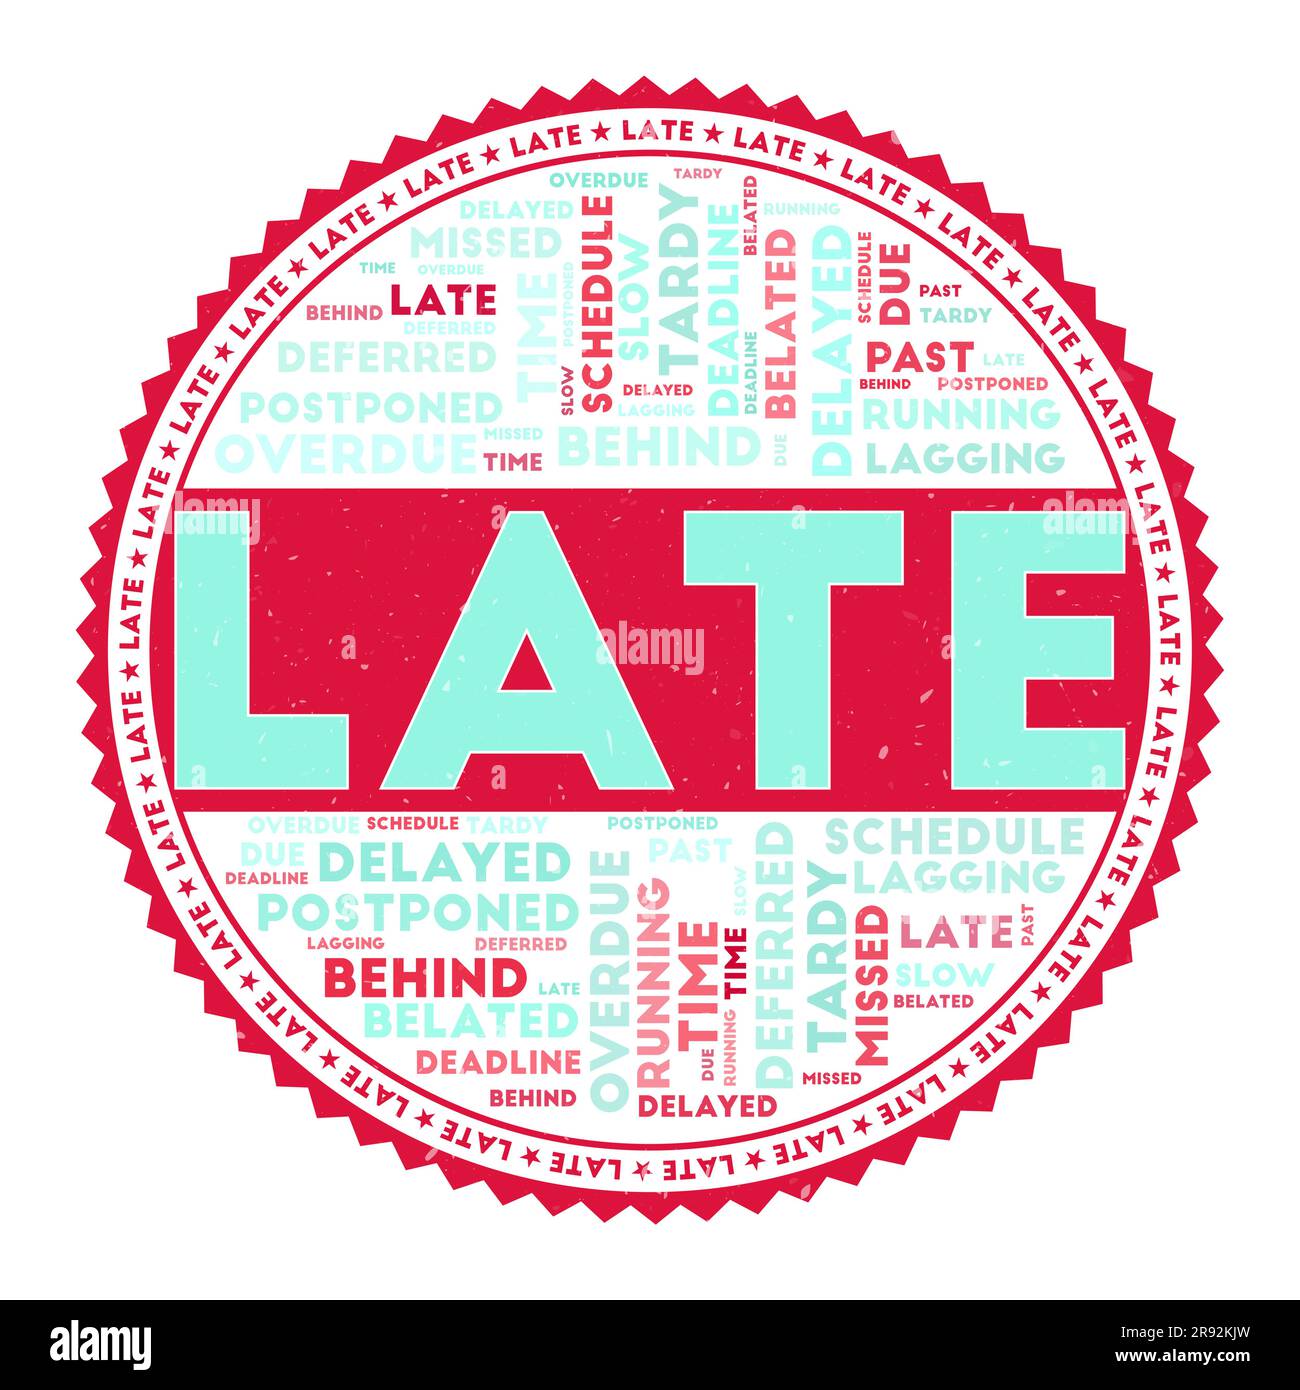 LATE word image. Late concept with word clouds and round text. Nice colors and grunge texture. Neat vector illustration. Stock Vector